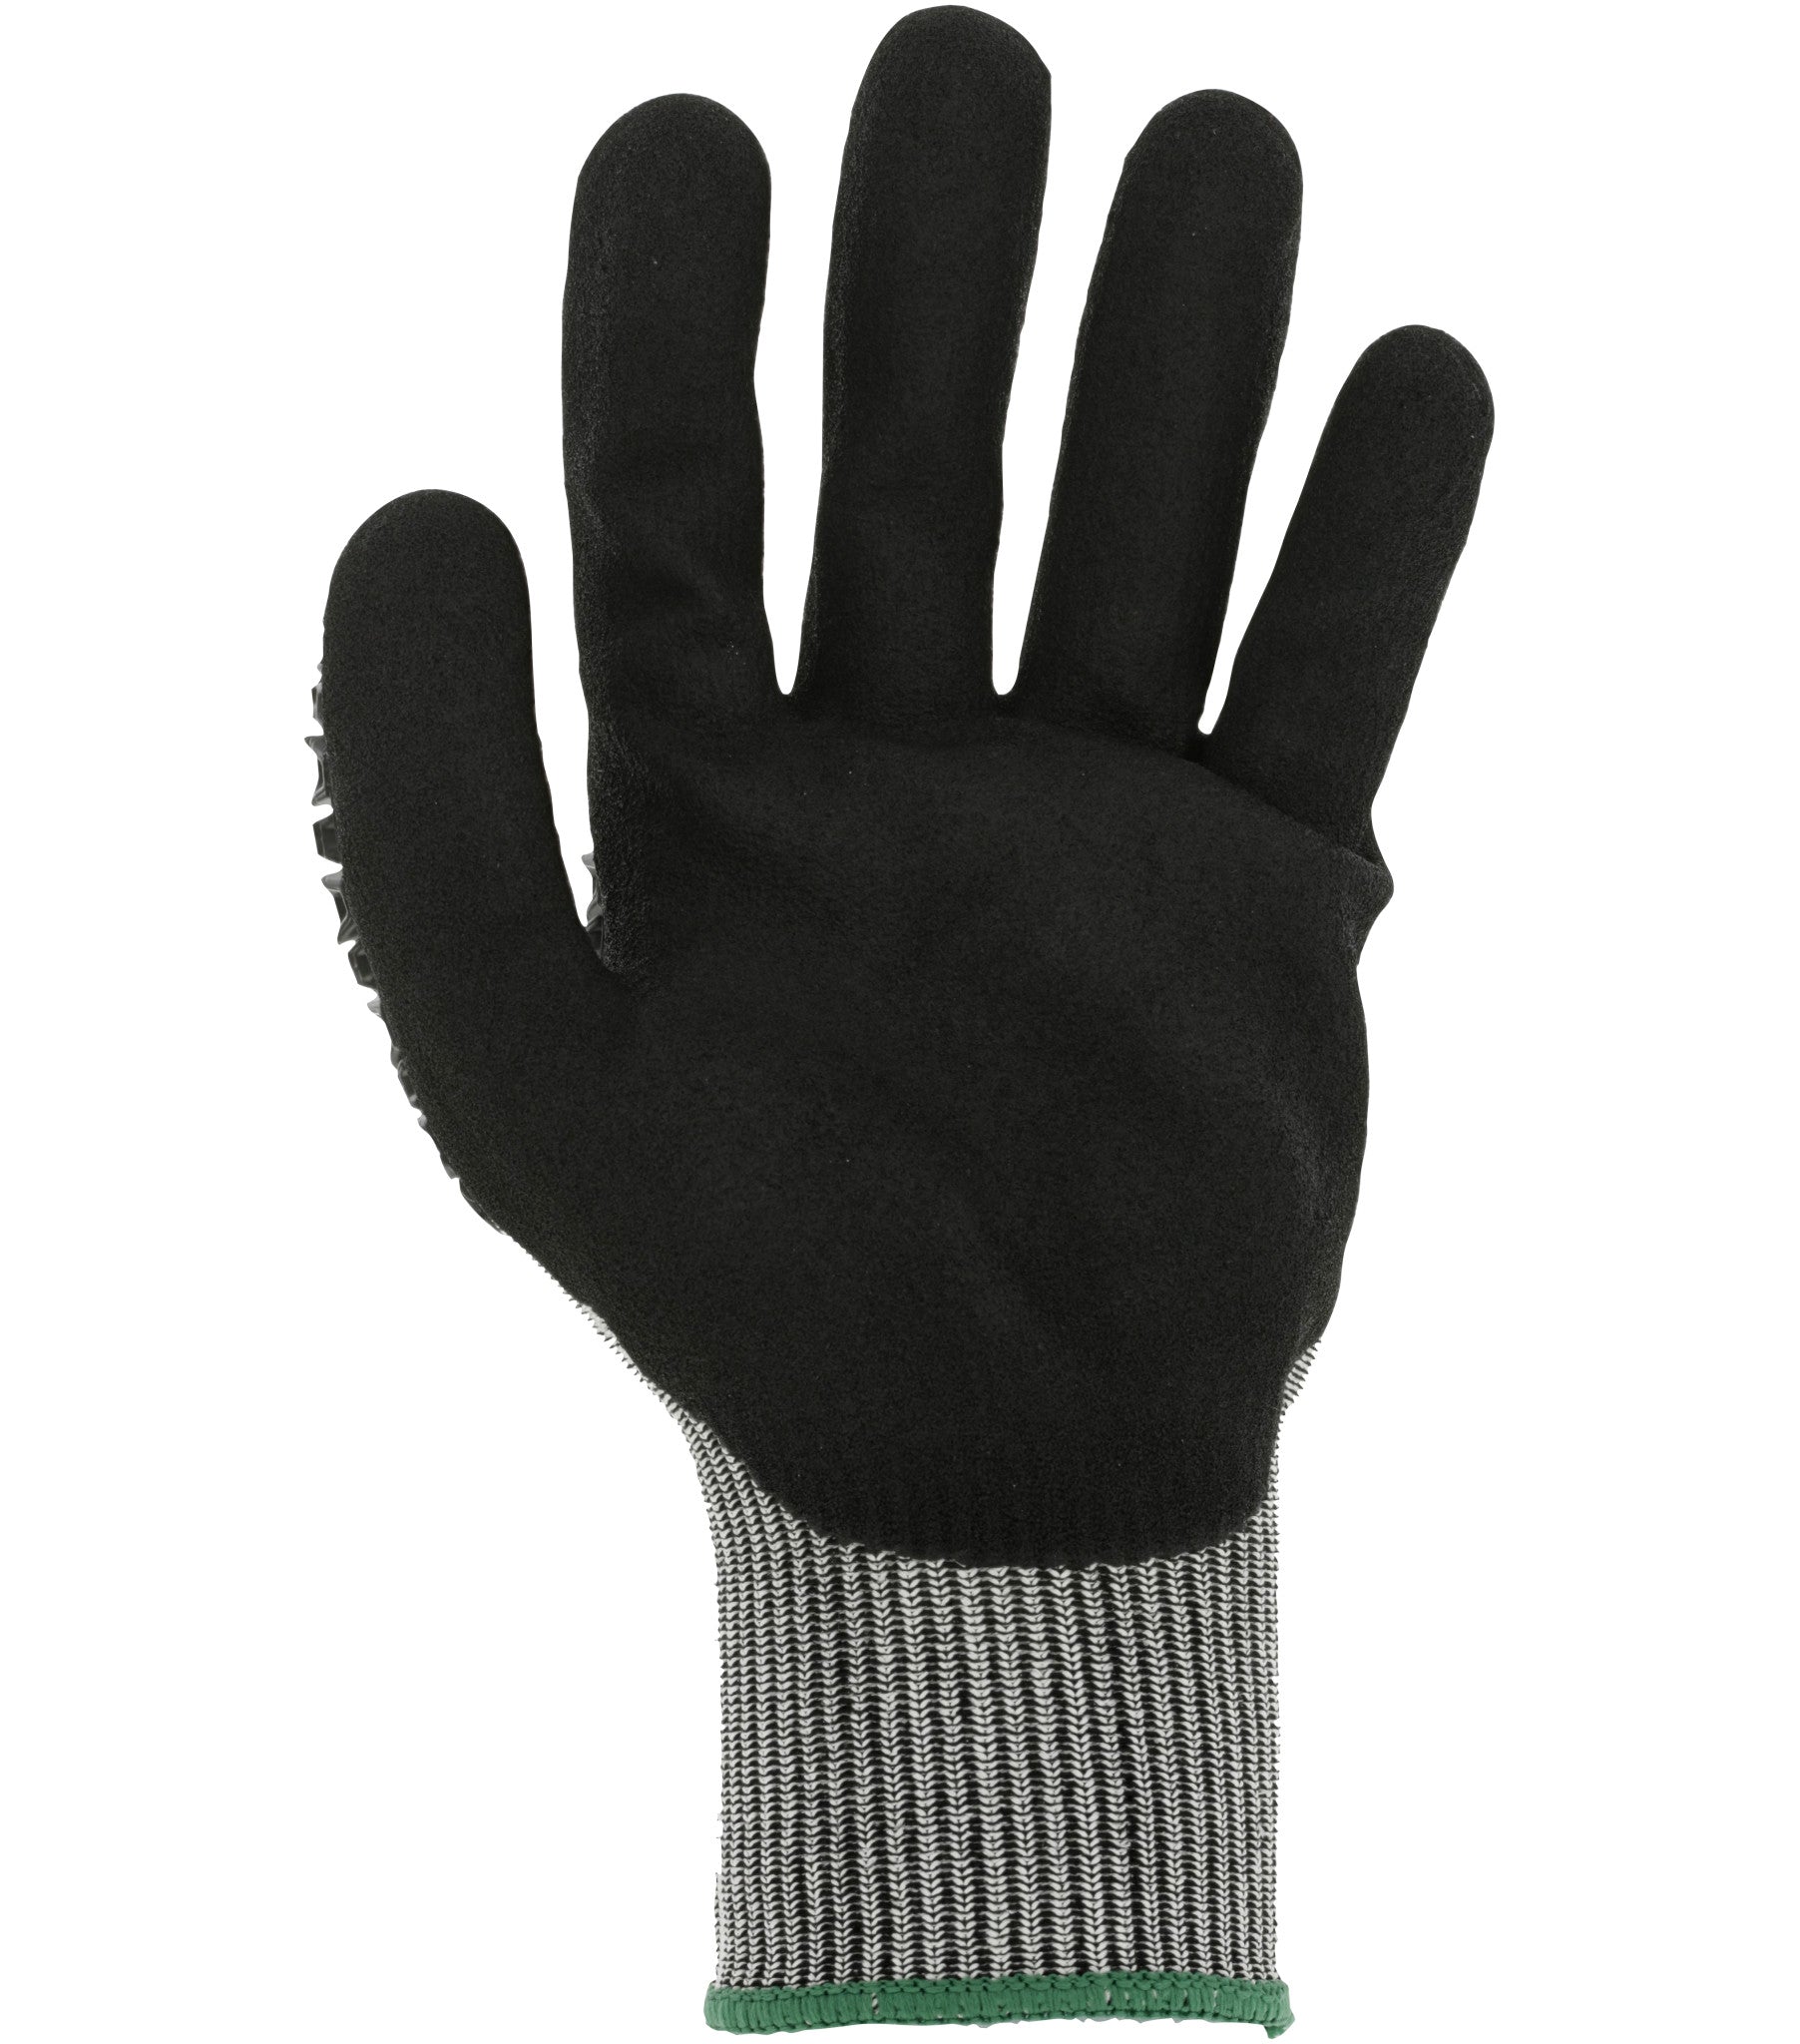 Mechanix Wear Impact Resistant coated knit gloves, Speedknit M-Pact D3O, Grey, 1 Pair in plastic (Sizes SM, MD, LG, XL and XXL)